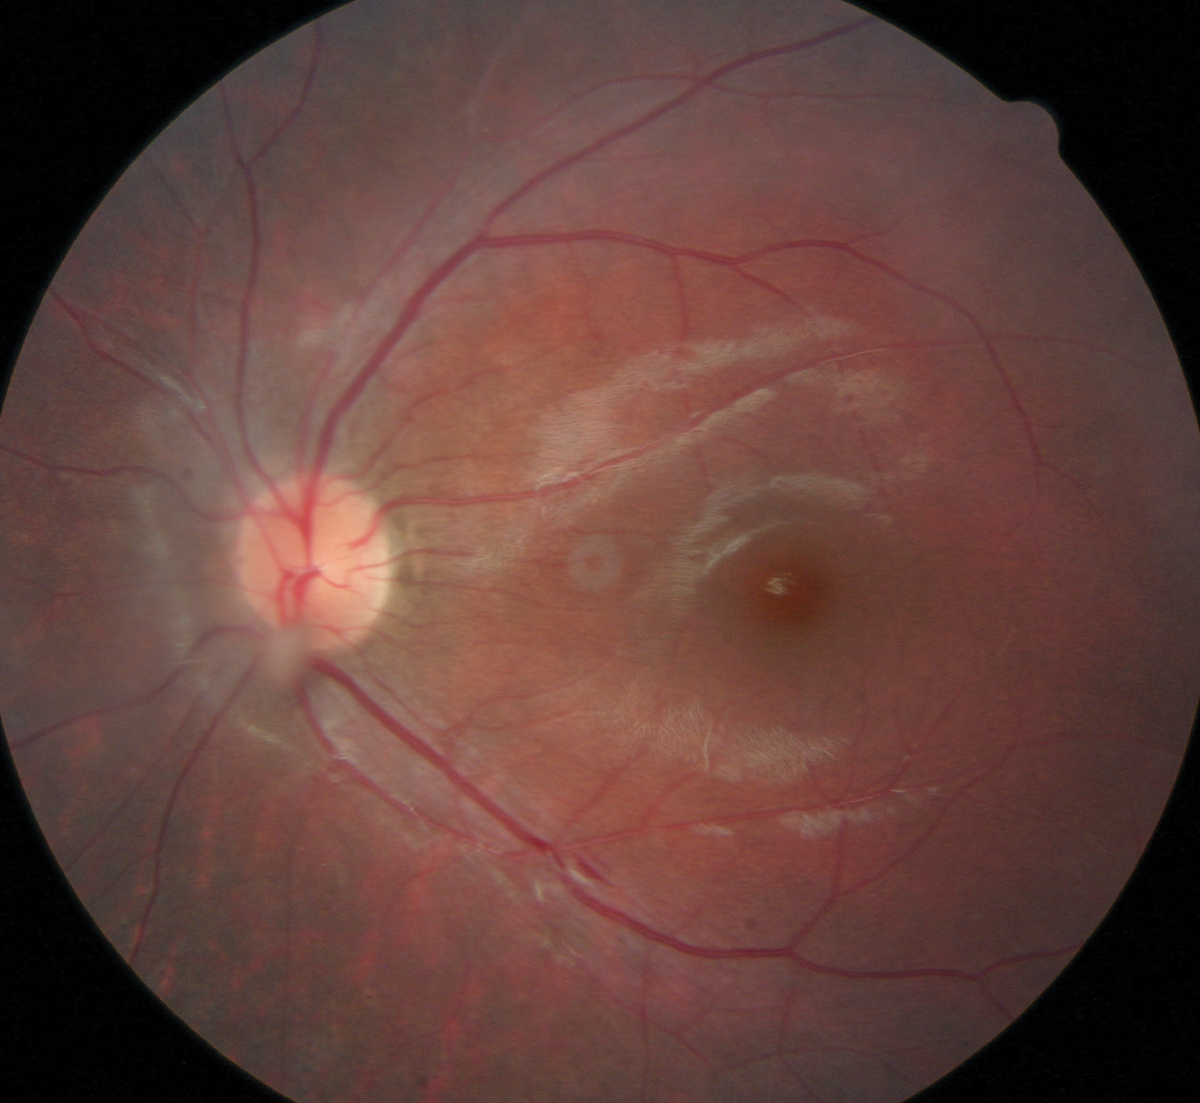 Here, a floater can be easily seen just above the bottom part of the patient’s optic nerve head. This particular floater was too close to the retina, which contraindicated laser treatment.